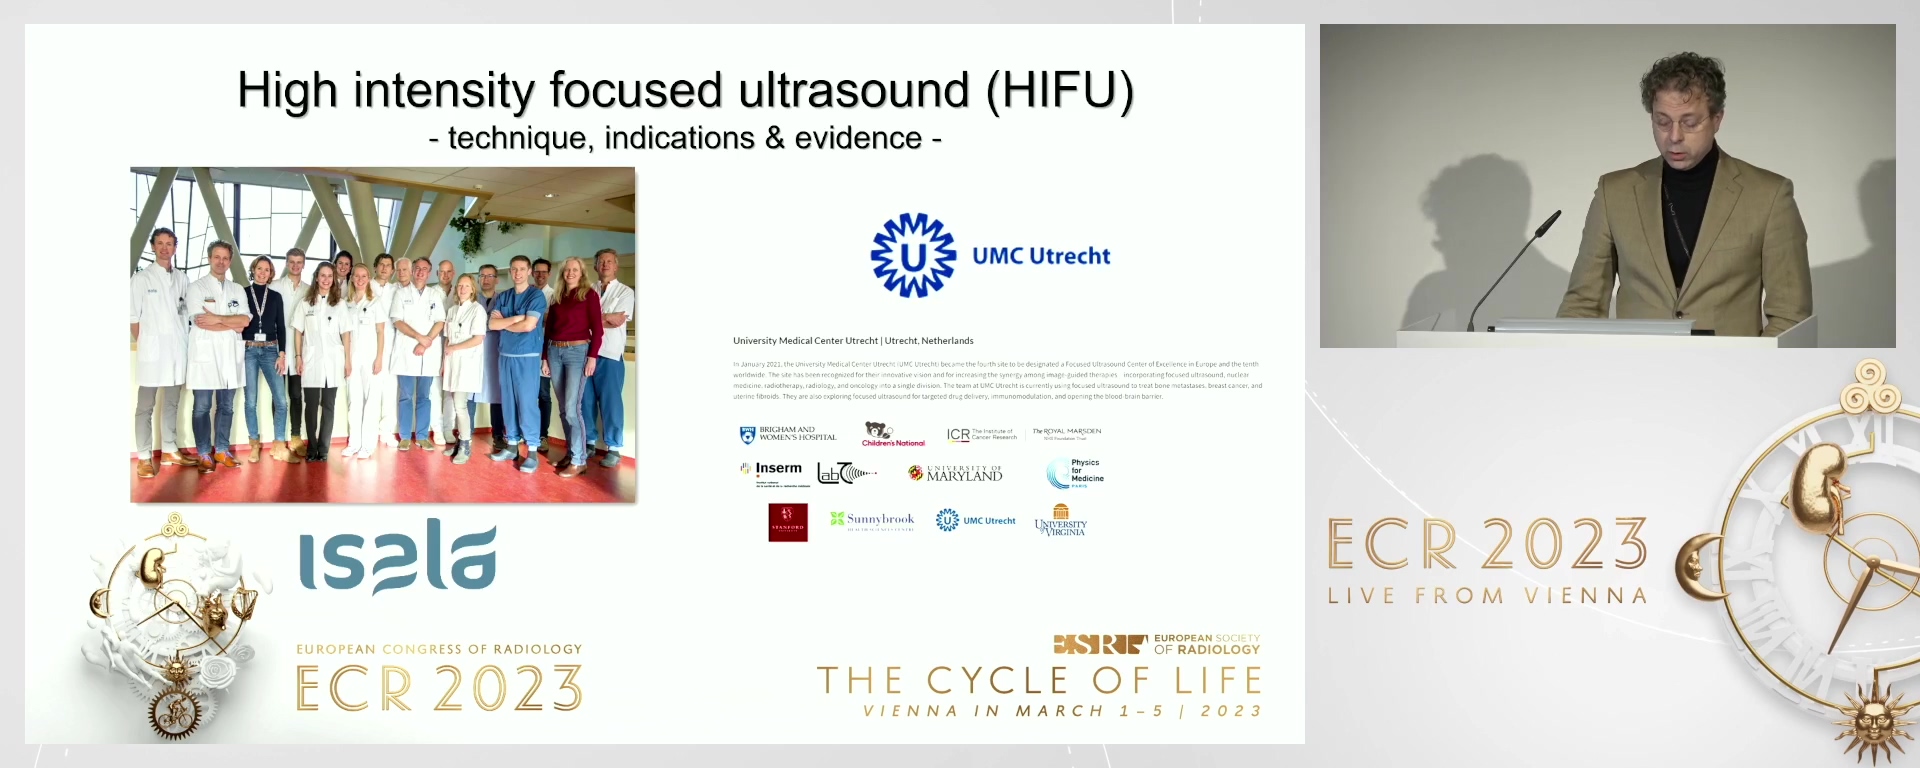 High intensity focused ultrasound (HIFU): technique, indications, and evidence